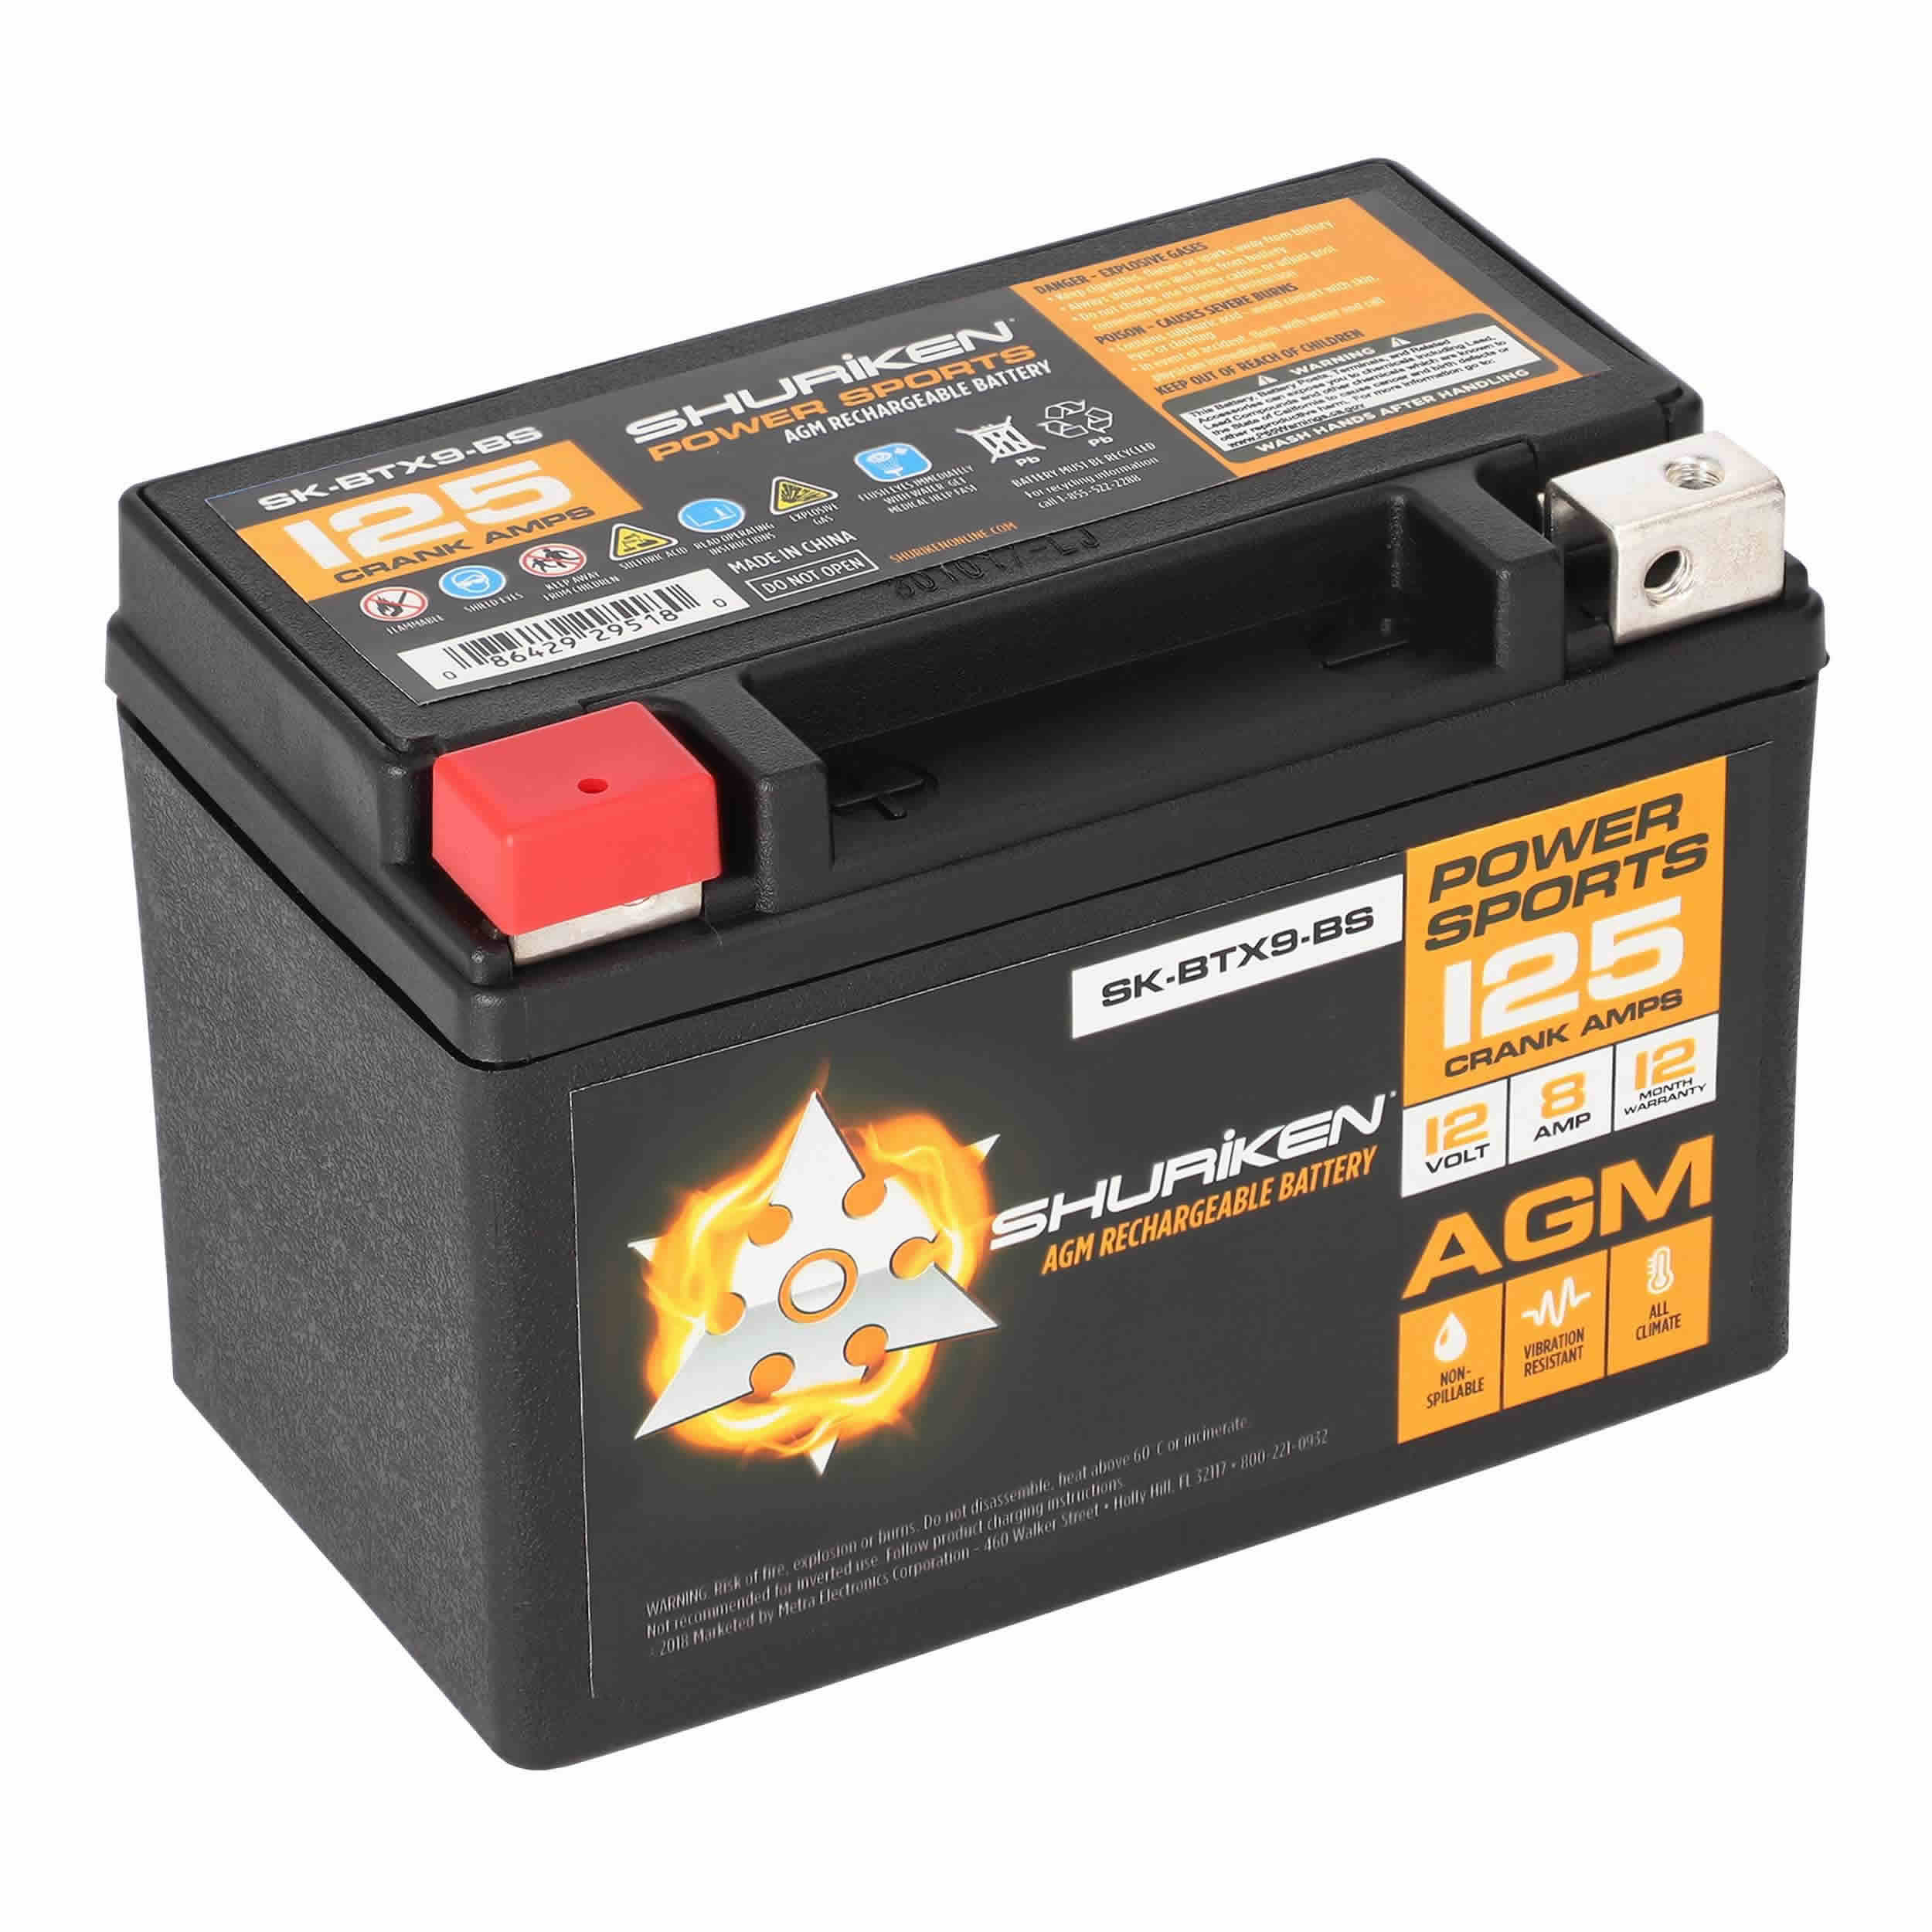 125 Crank AMPS / 8AMP Hours AGM Battery